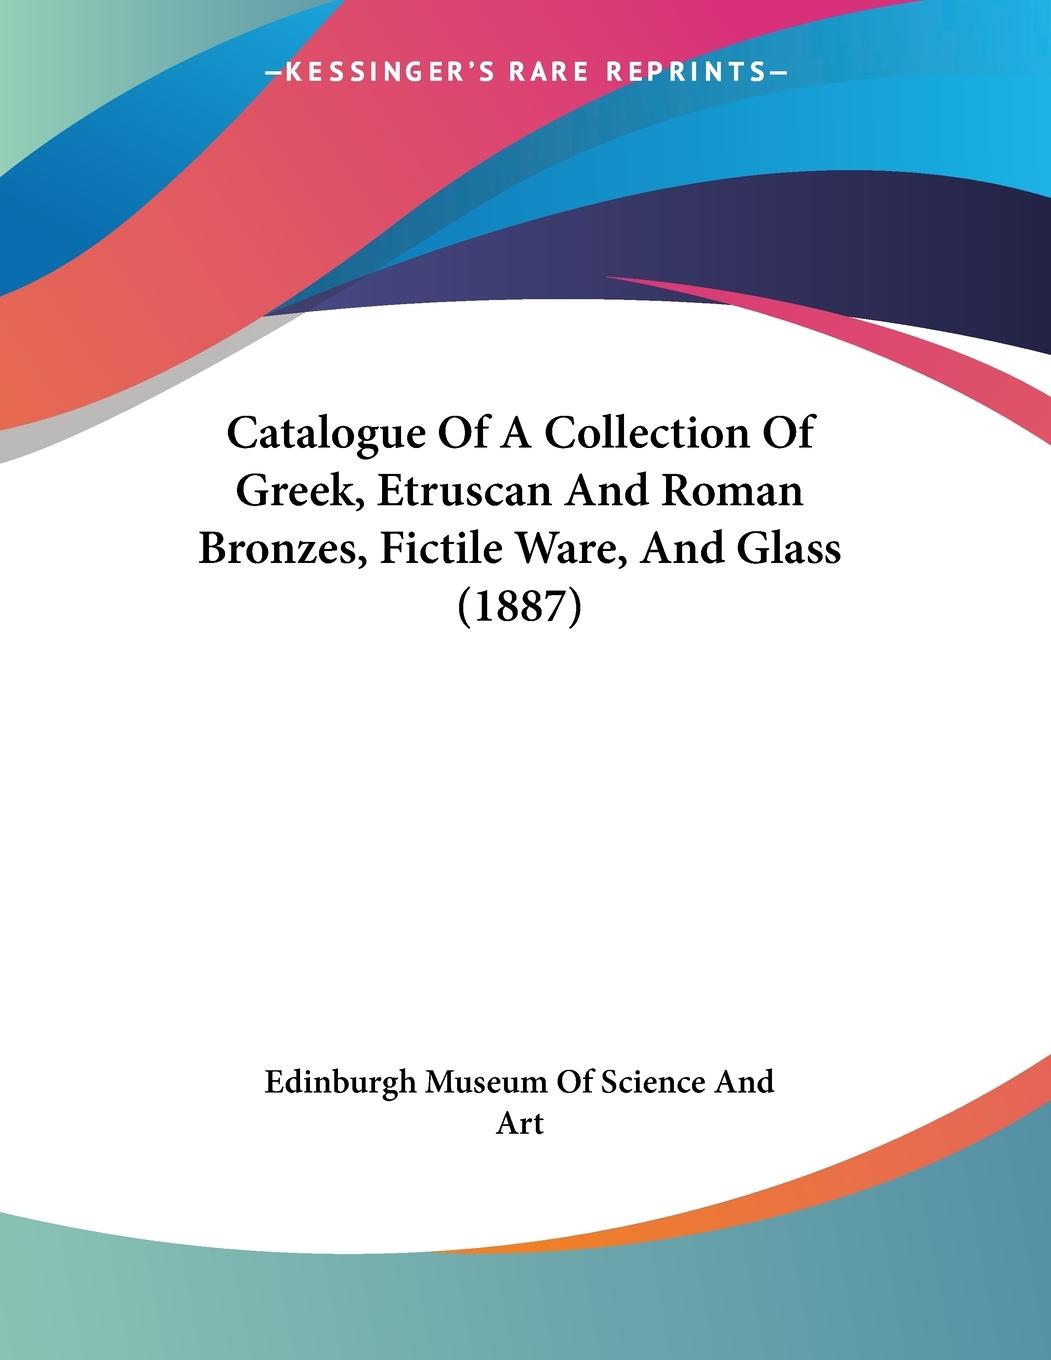 Catalogue Of A Collection Of Greek, Etruscan And Roman Bronzes, Fictile Ware, And Glass (1887) - Edinburgh Museum Of Science And Art